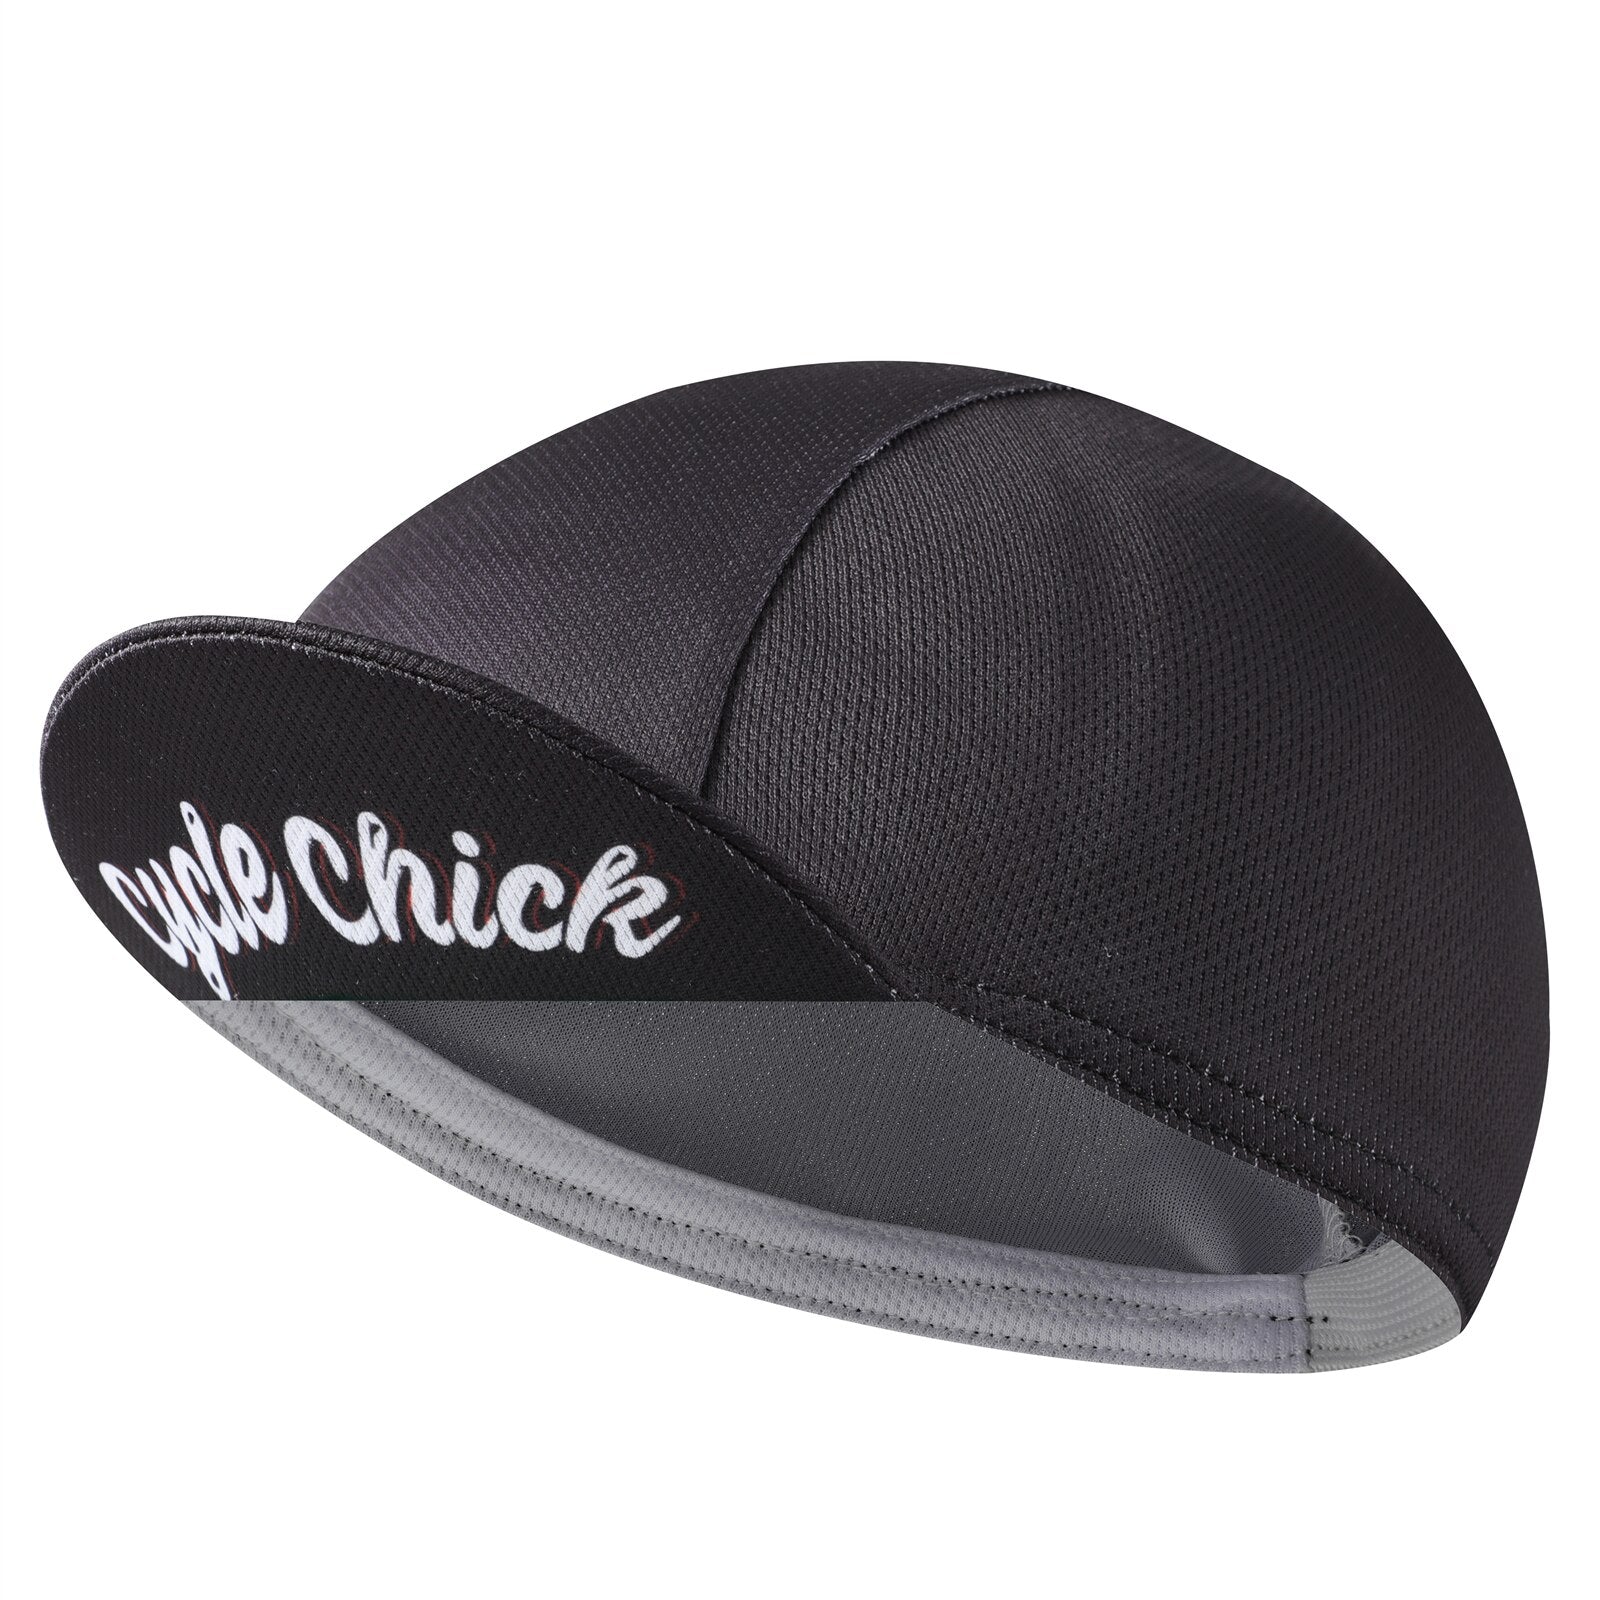 Black Cycling Cap - Polyester Cycling Hat-Under Helmet - Cycling Helmet Liner Breathable&Sweat Uptake